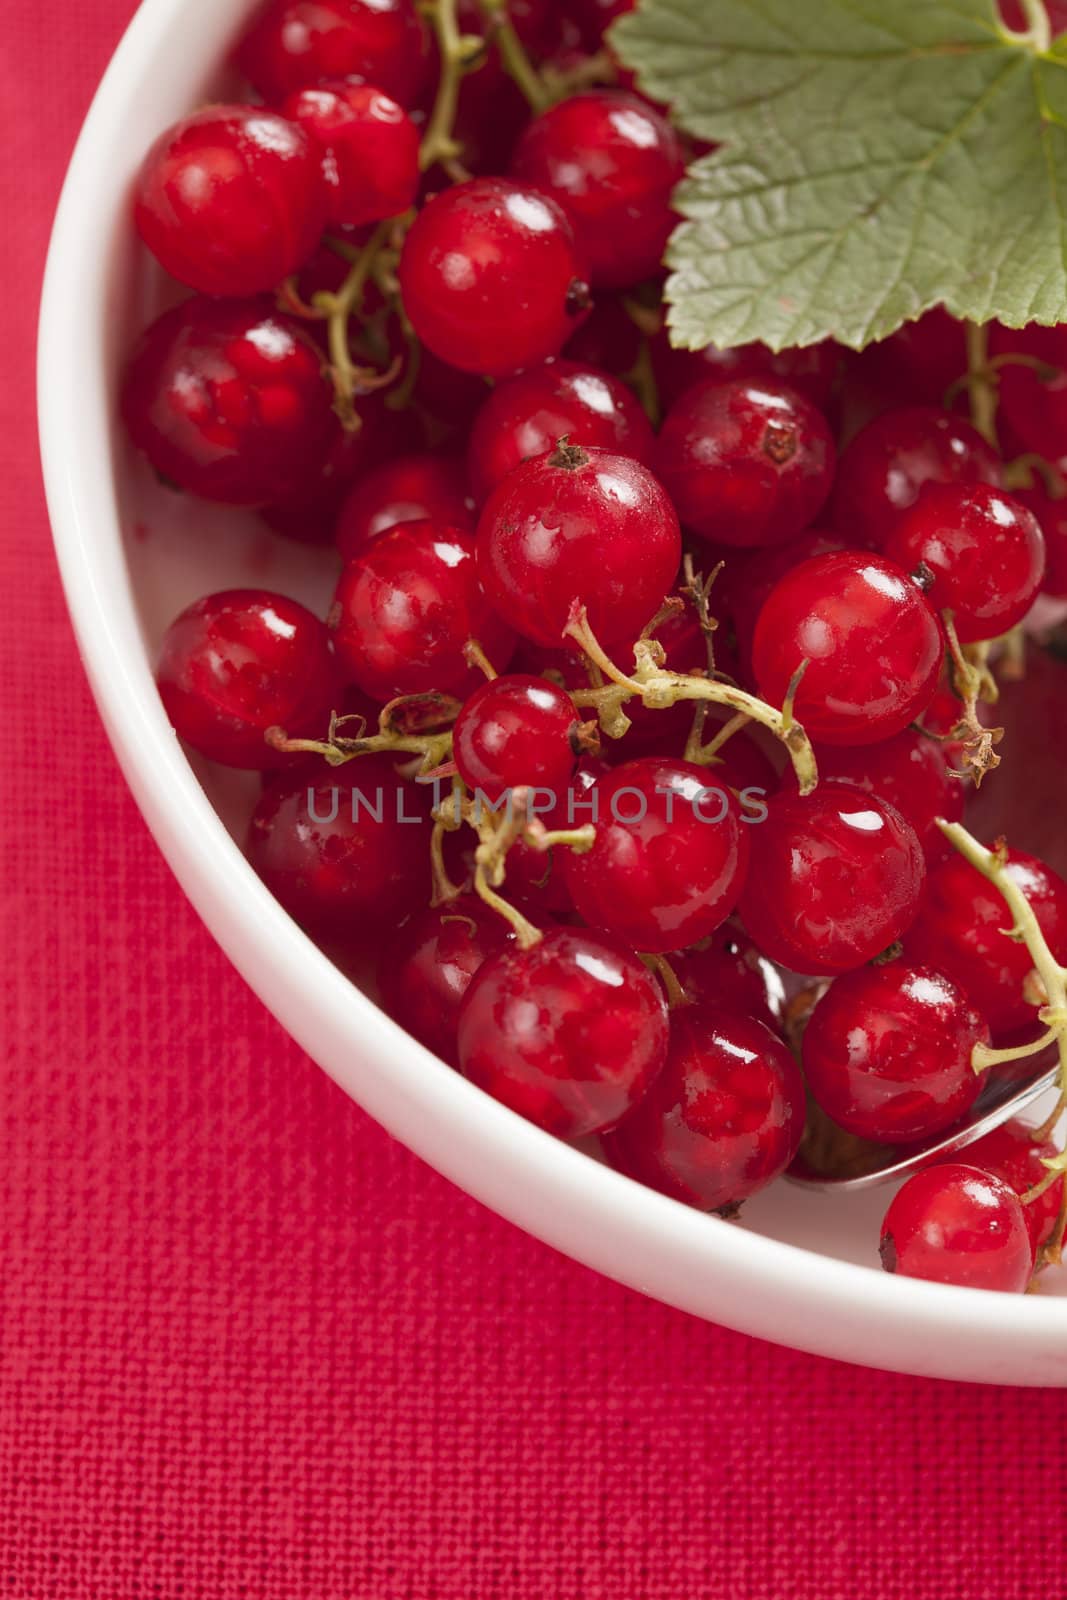 Red currant by biitli